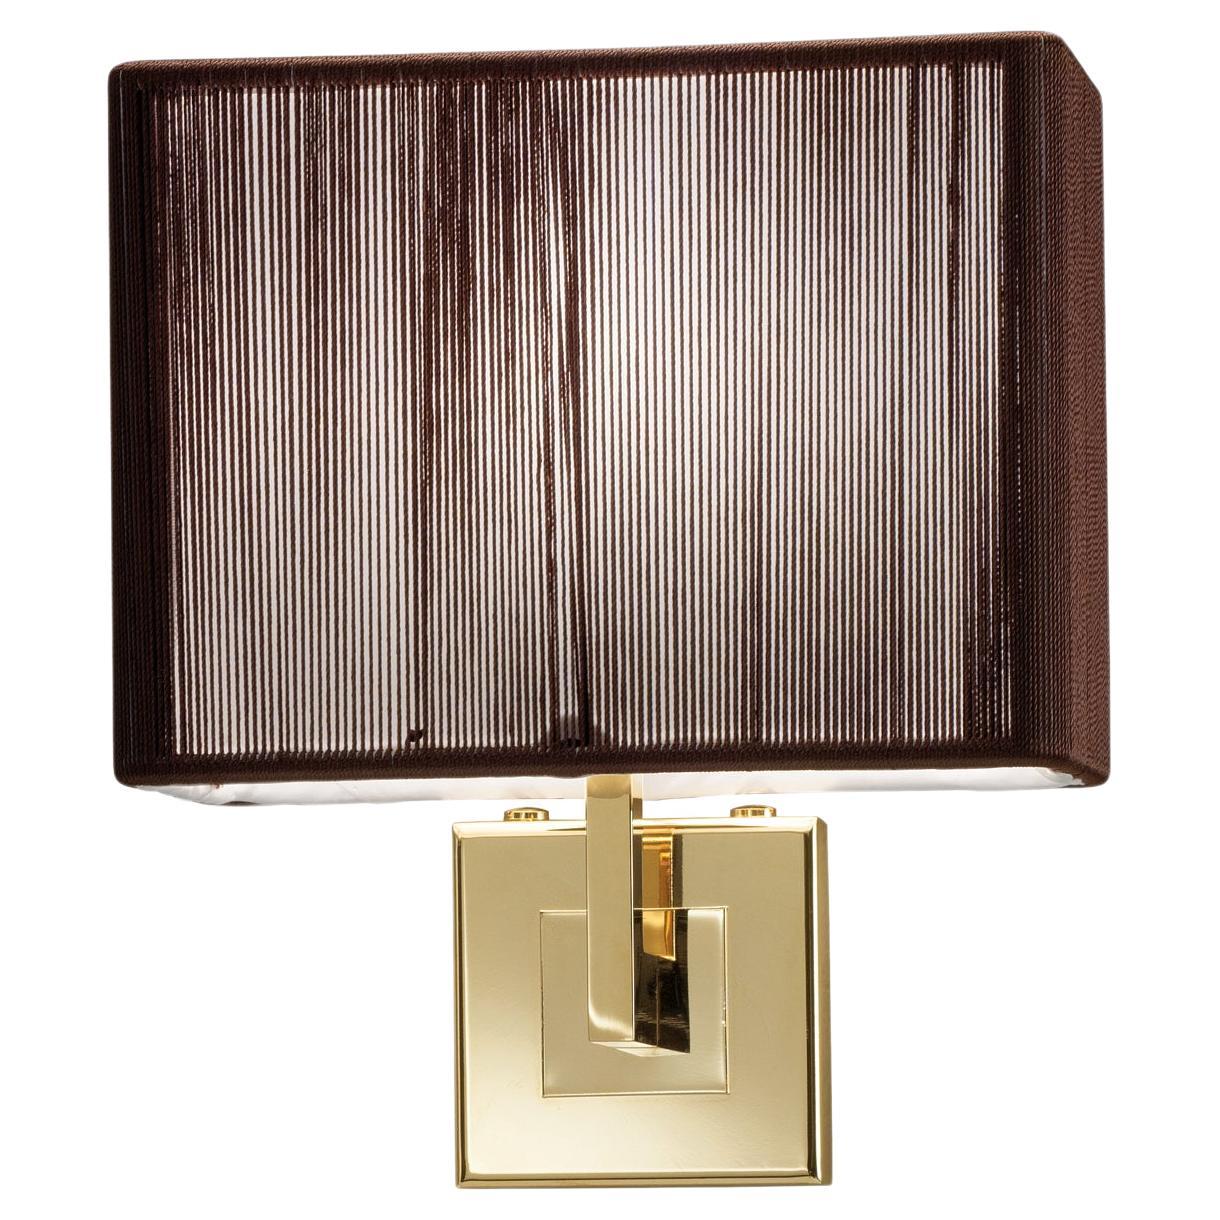 Axolight Clavius Small Wall Lamp with Arm in Tobacco Lampshade and Gold Finish